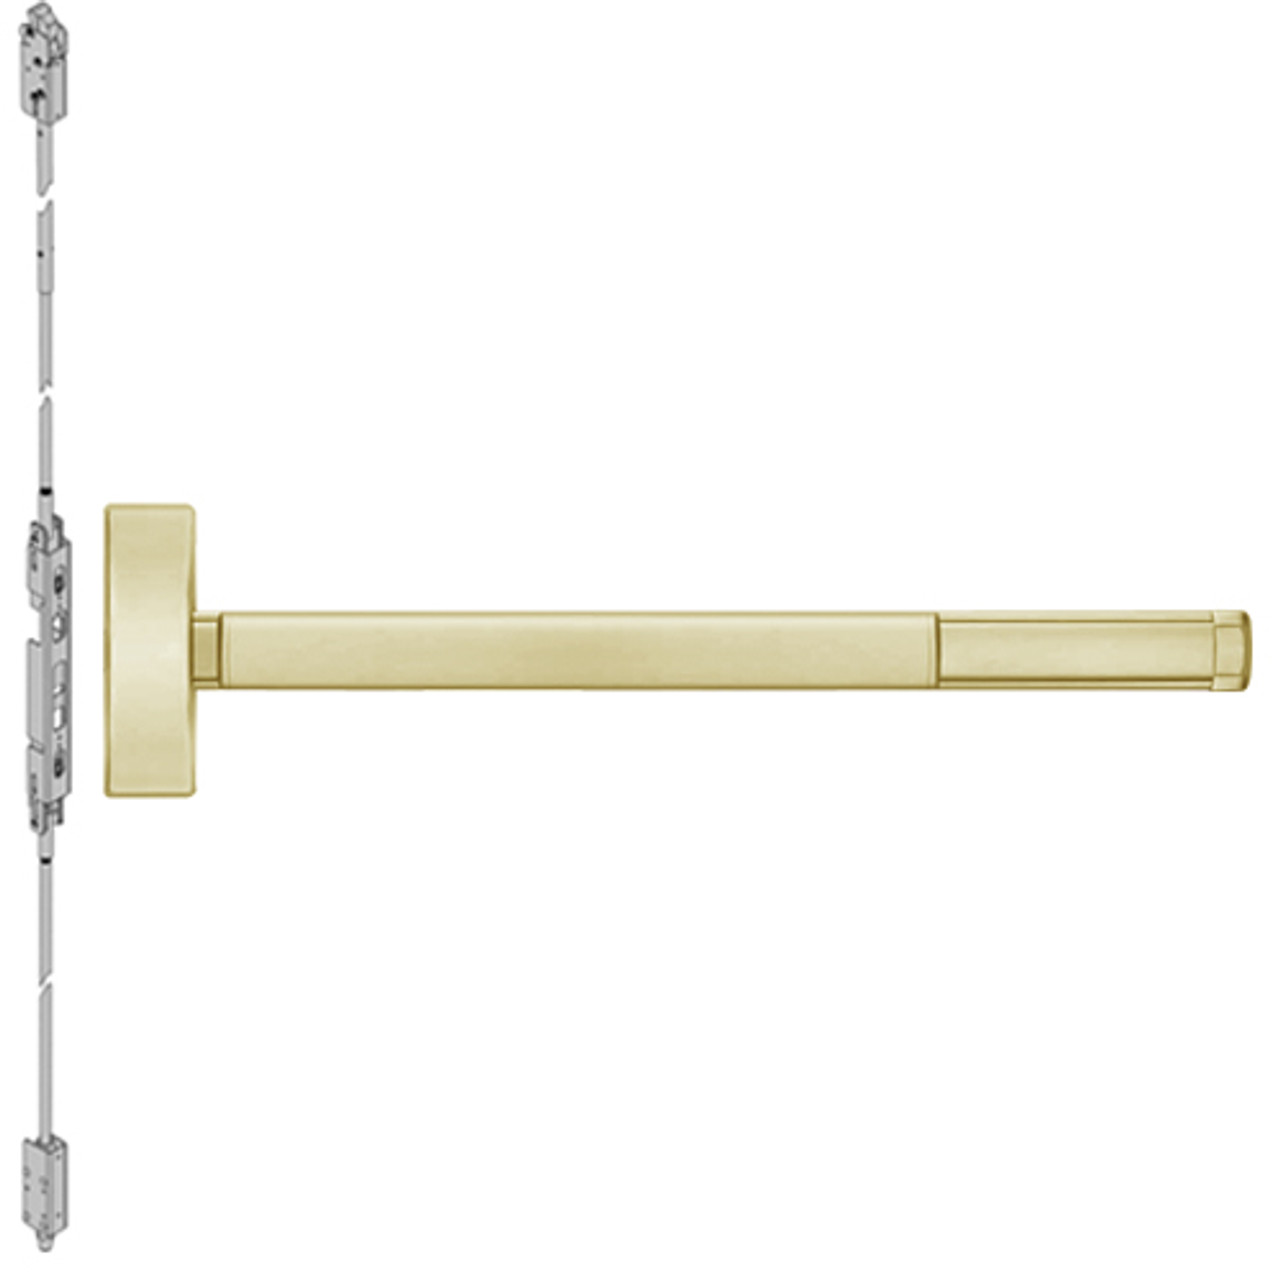 ELR2808-606-48 PHI 2800 Series Concealed Vertical Rod Exit Device with Electric Latch Retraction Prepped for Key Controls Lever-Knob in Satin Brass Finish